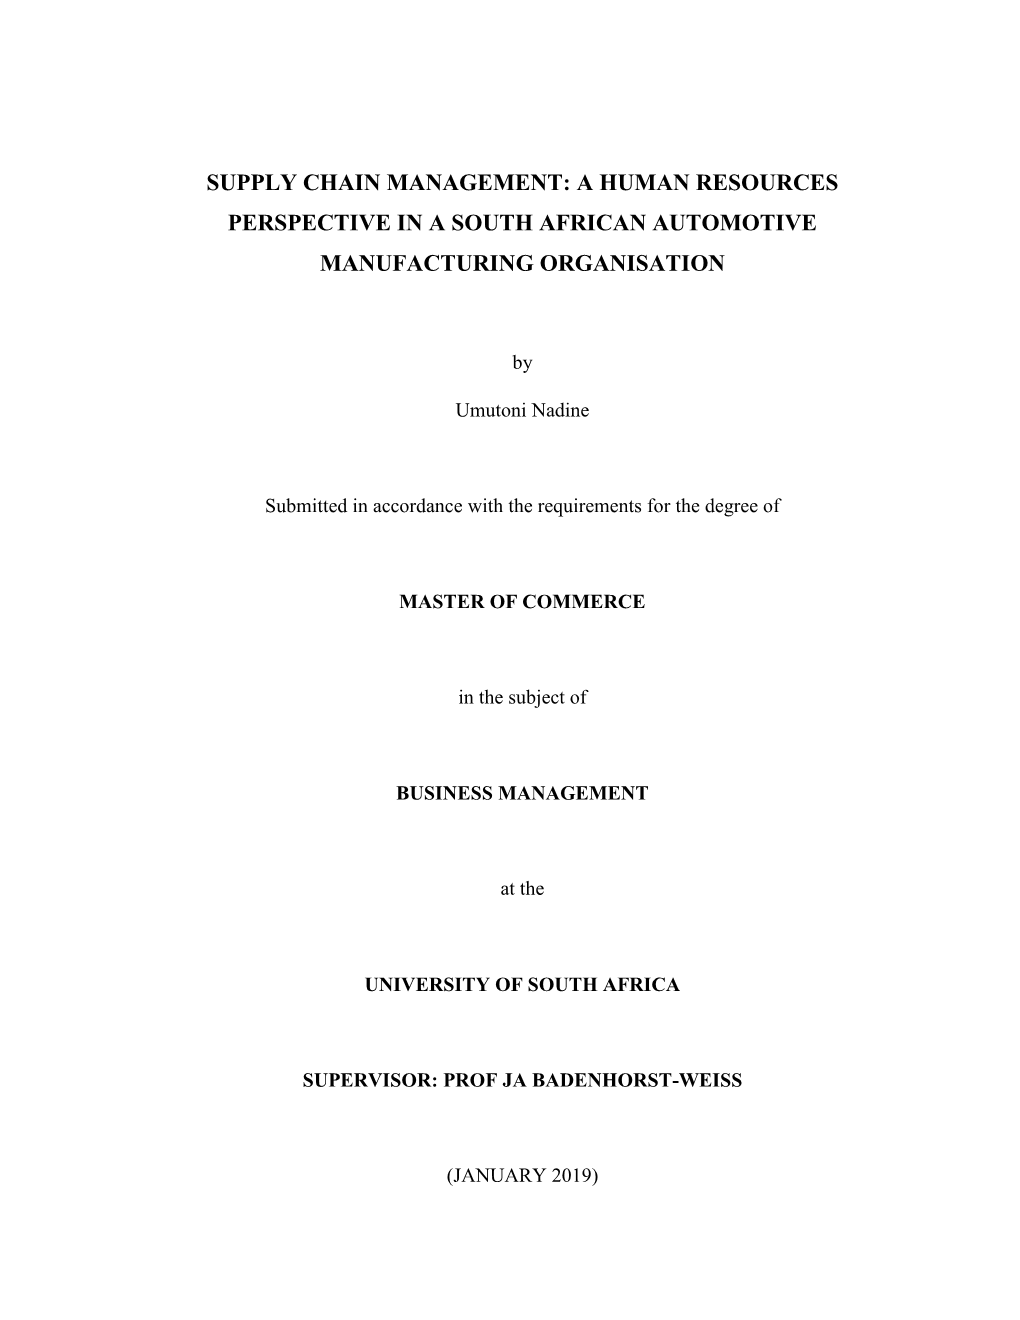 Supply Chain Management: a Human Resources Perspective in a South African Automotive Manufacturing Organisation